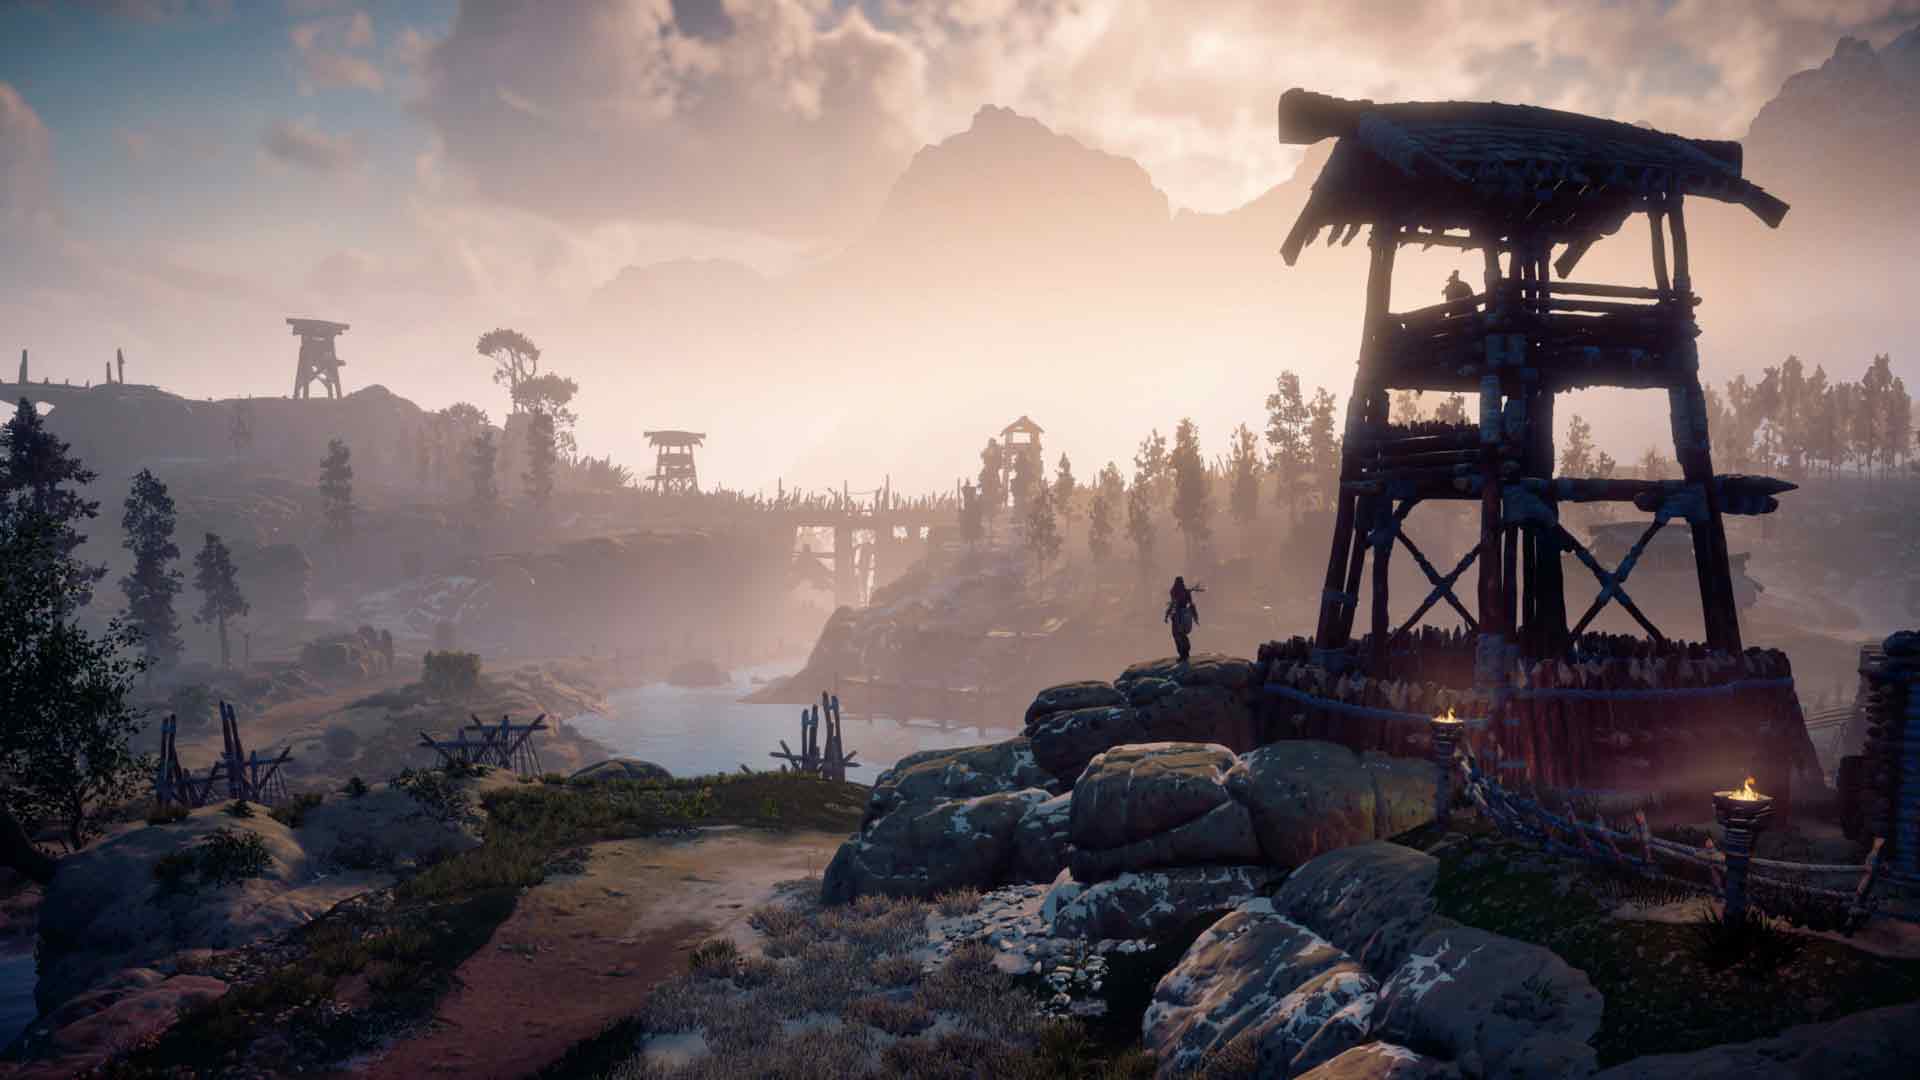 Horizon Zero Dawn is a Mix of Tomb Raider and The Witcher